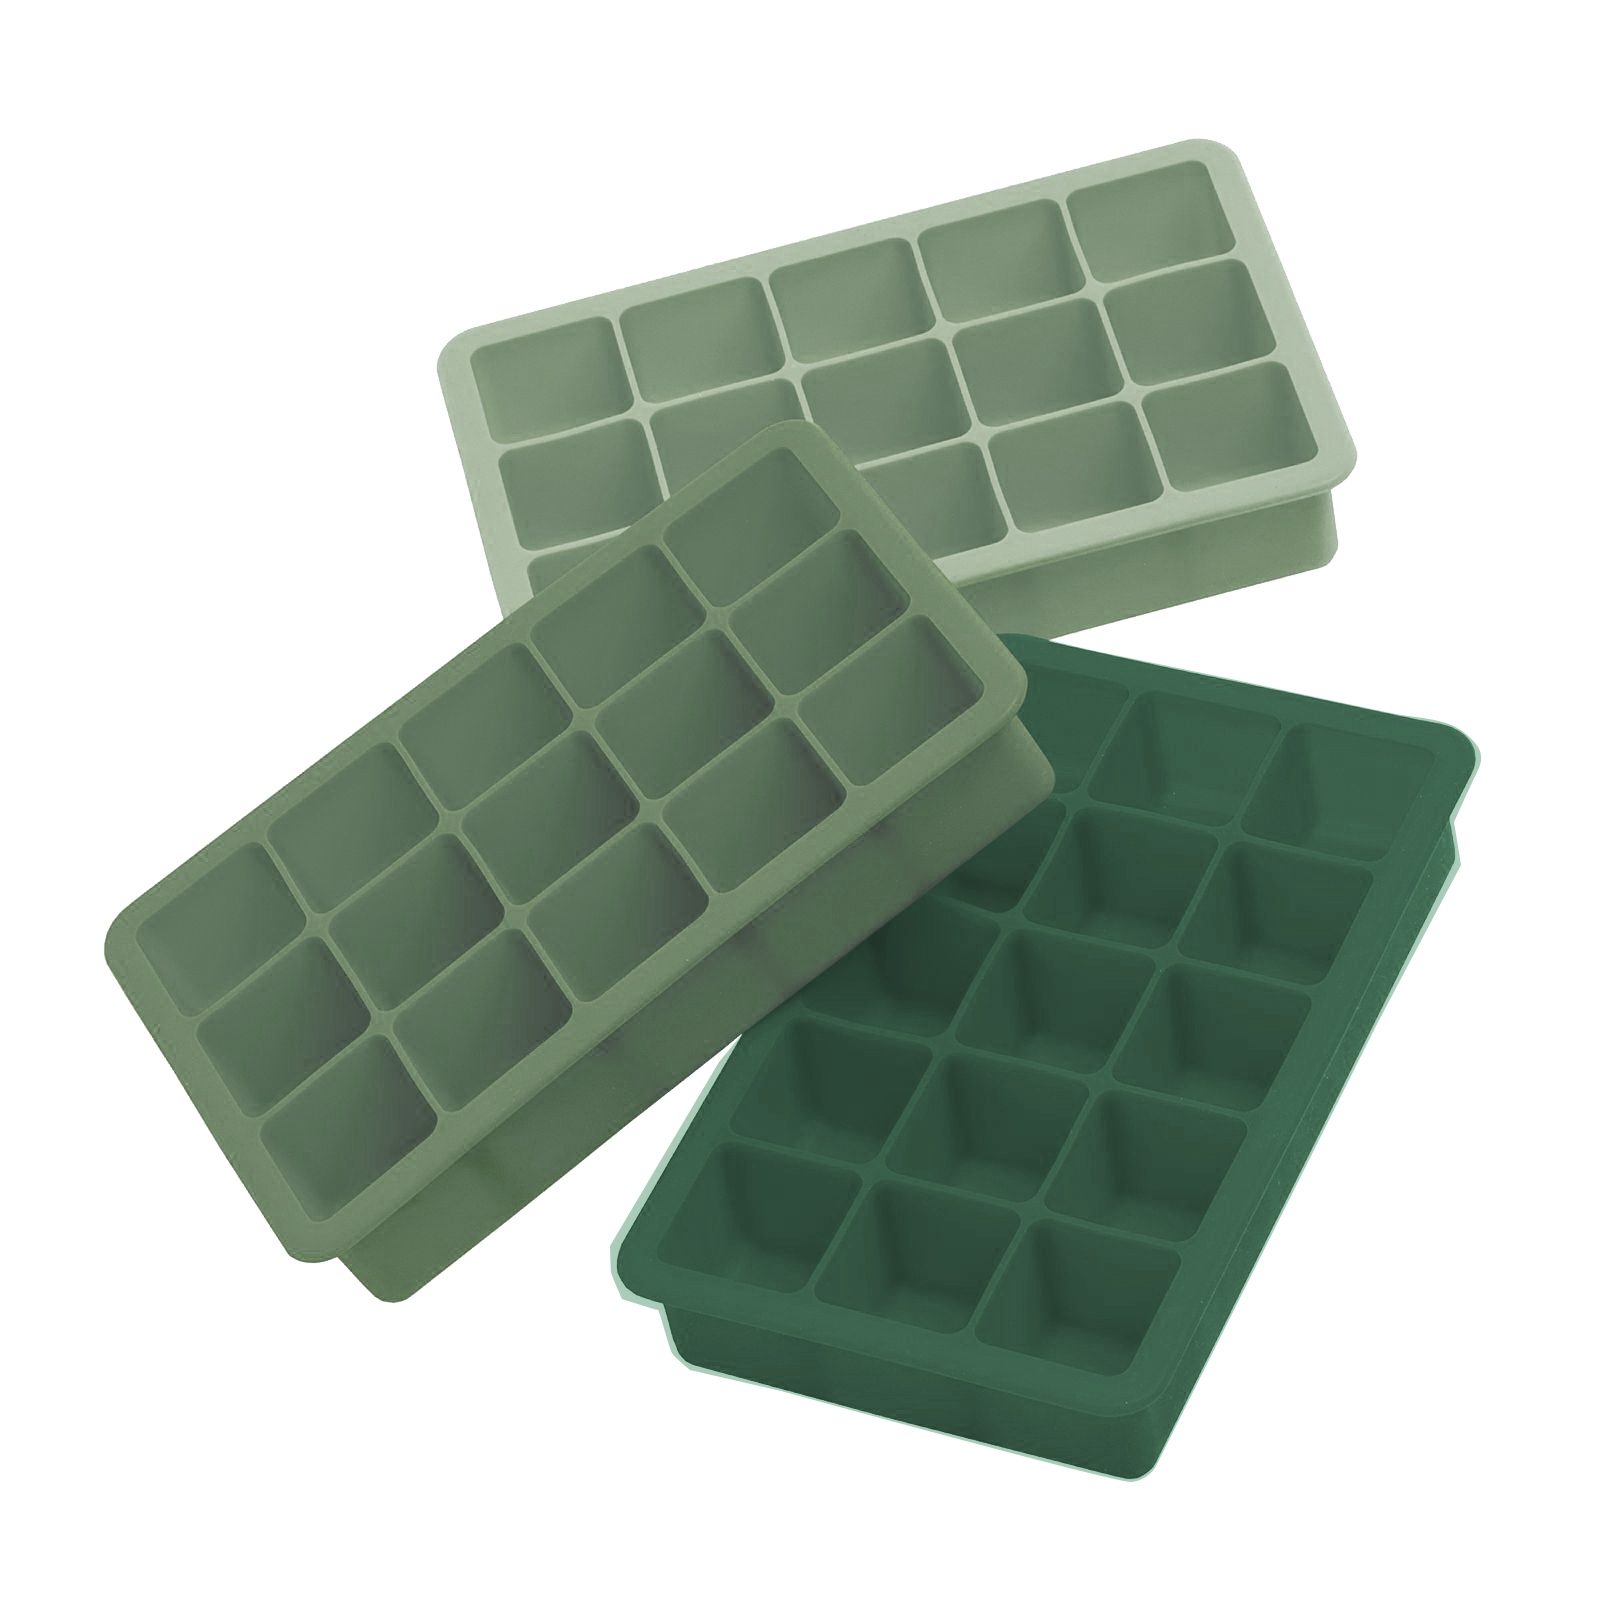 TRIPLE PACK CLASSIC ICE CUBE TRAY